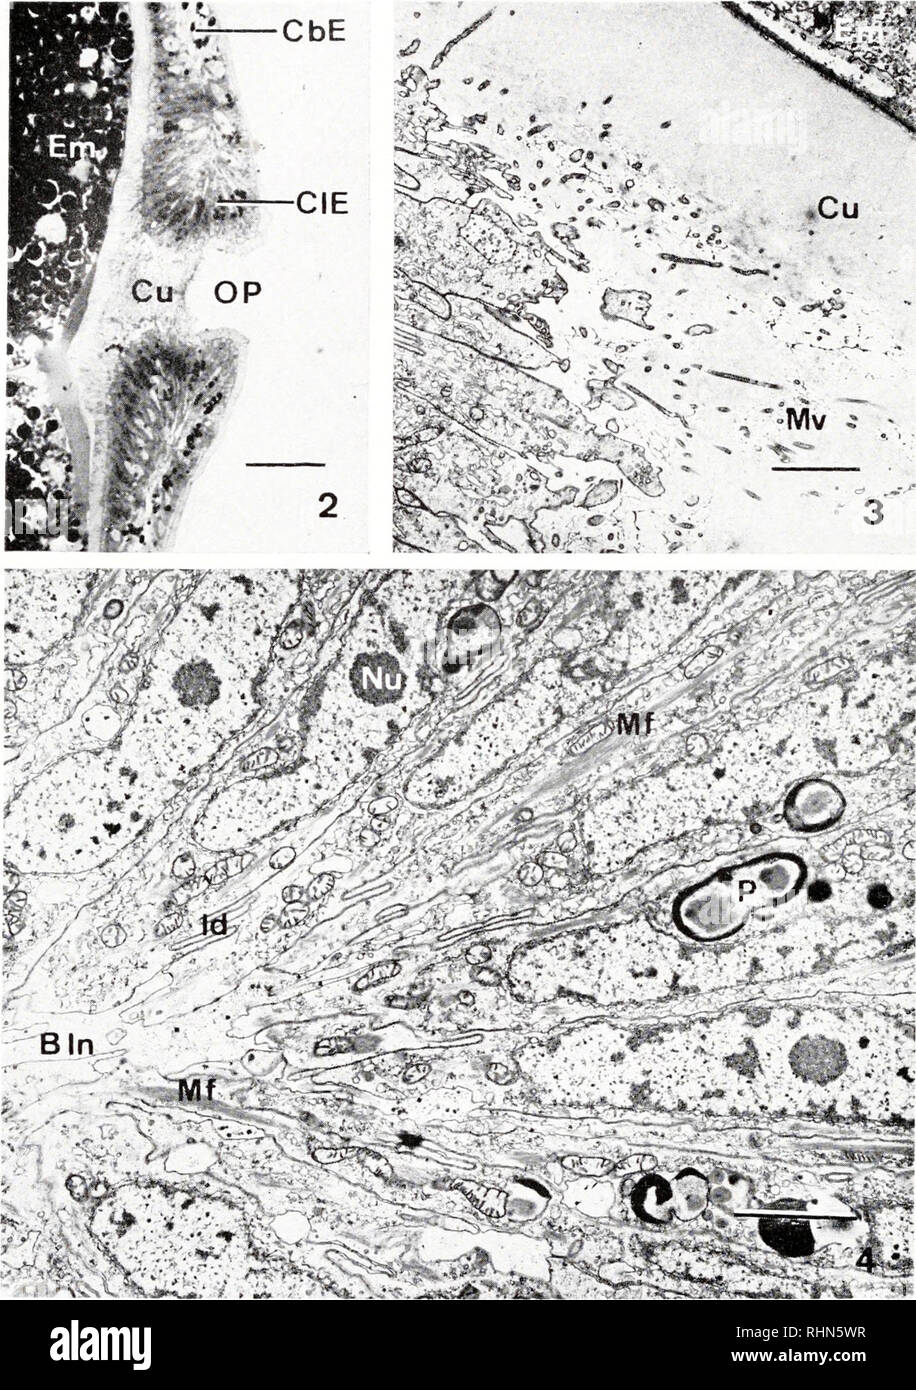 . The Biological bulletin. Biology; Zoology; Biology; Marine Biology. »Cu - ';- :-V^&amp;. FIGURE 2. Light micrograph of a sagittal section through a brooding operculum showing the columnar epithelium (CIE) bordering the opercular pore (OP), cuboidal epithelium (CbE), cuticle ( C'u). and embryos (Em) within the brood chamber. Scale equals 20 /j.. FIGURE 3. A thin section through the apical region of the columnar epithelium bordering the pore of a brooding operculum. Note the narrow diameter of the epithelial cells, the long microvilli (Mv) penetrating the filamentous cuticle (Cu), and a portio Stock Photo